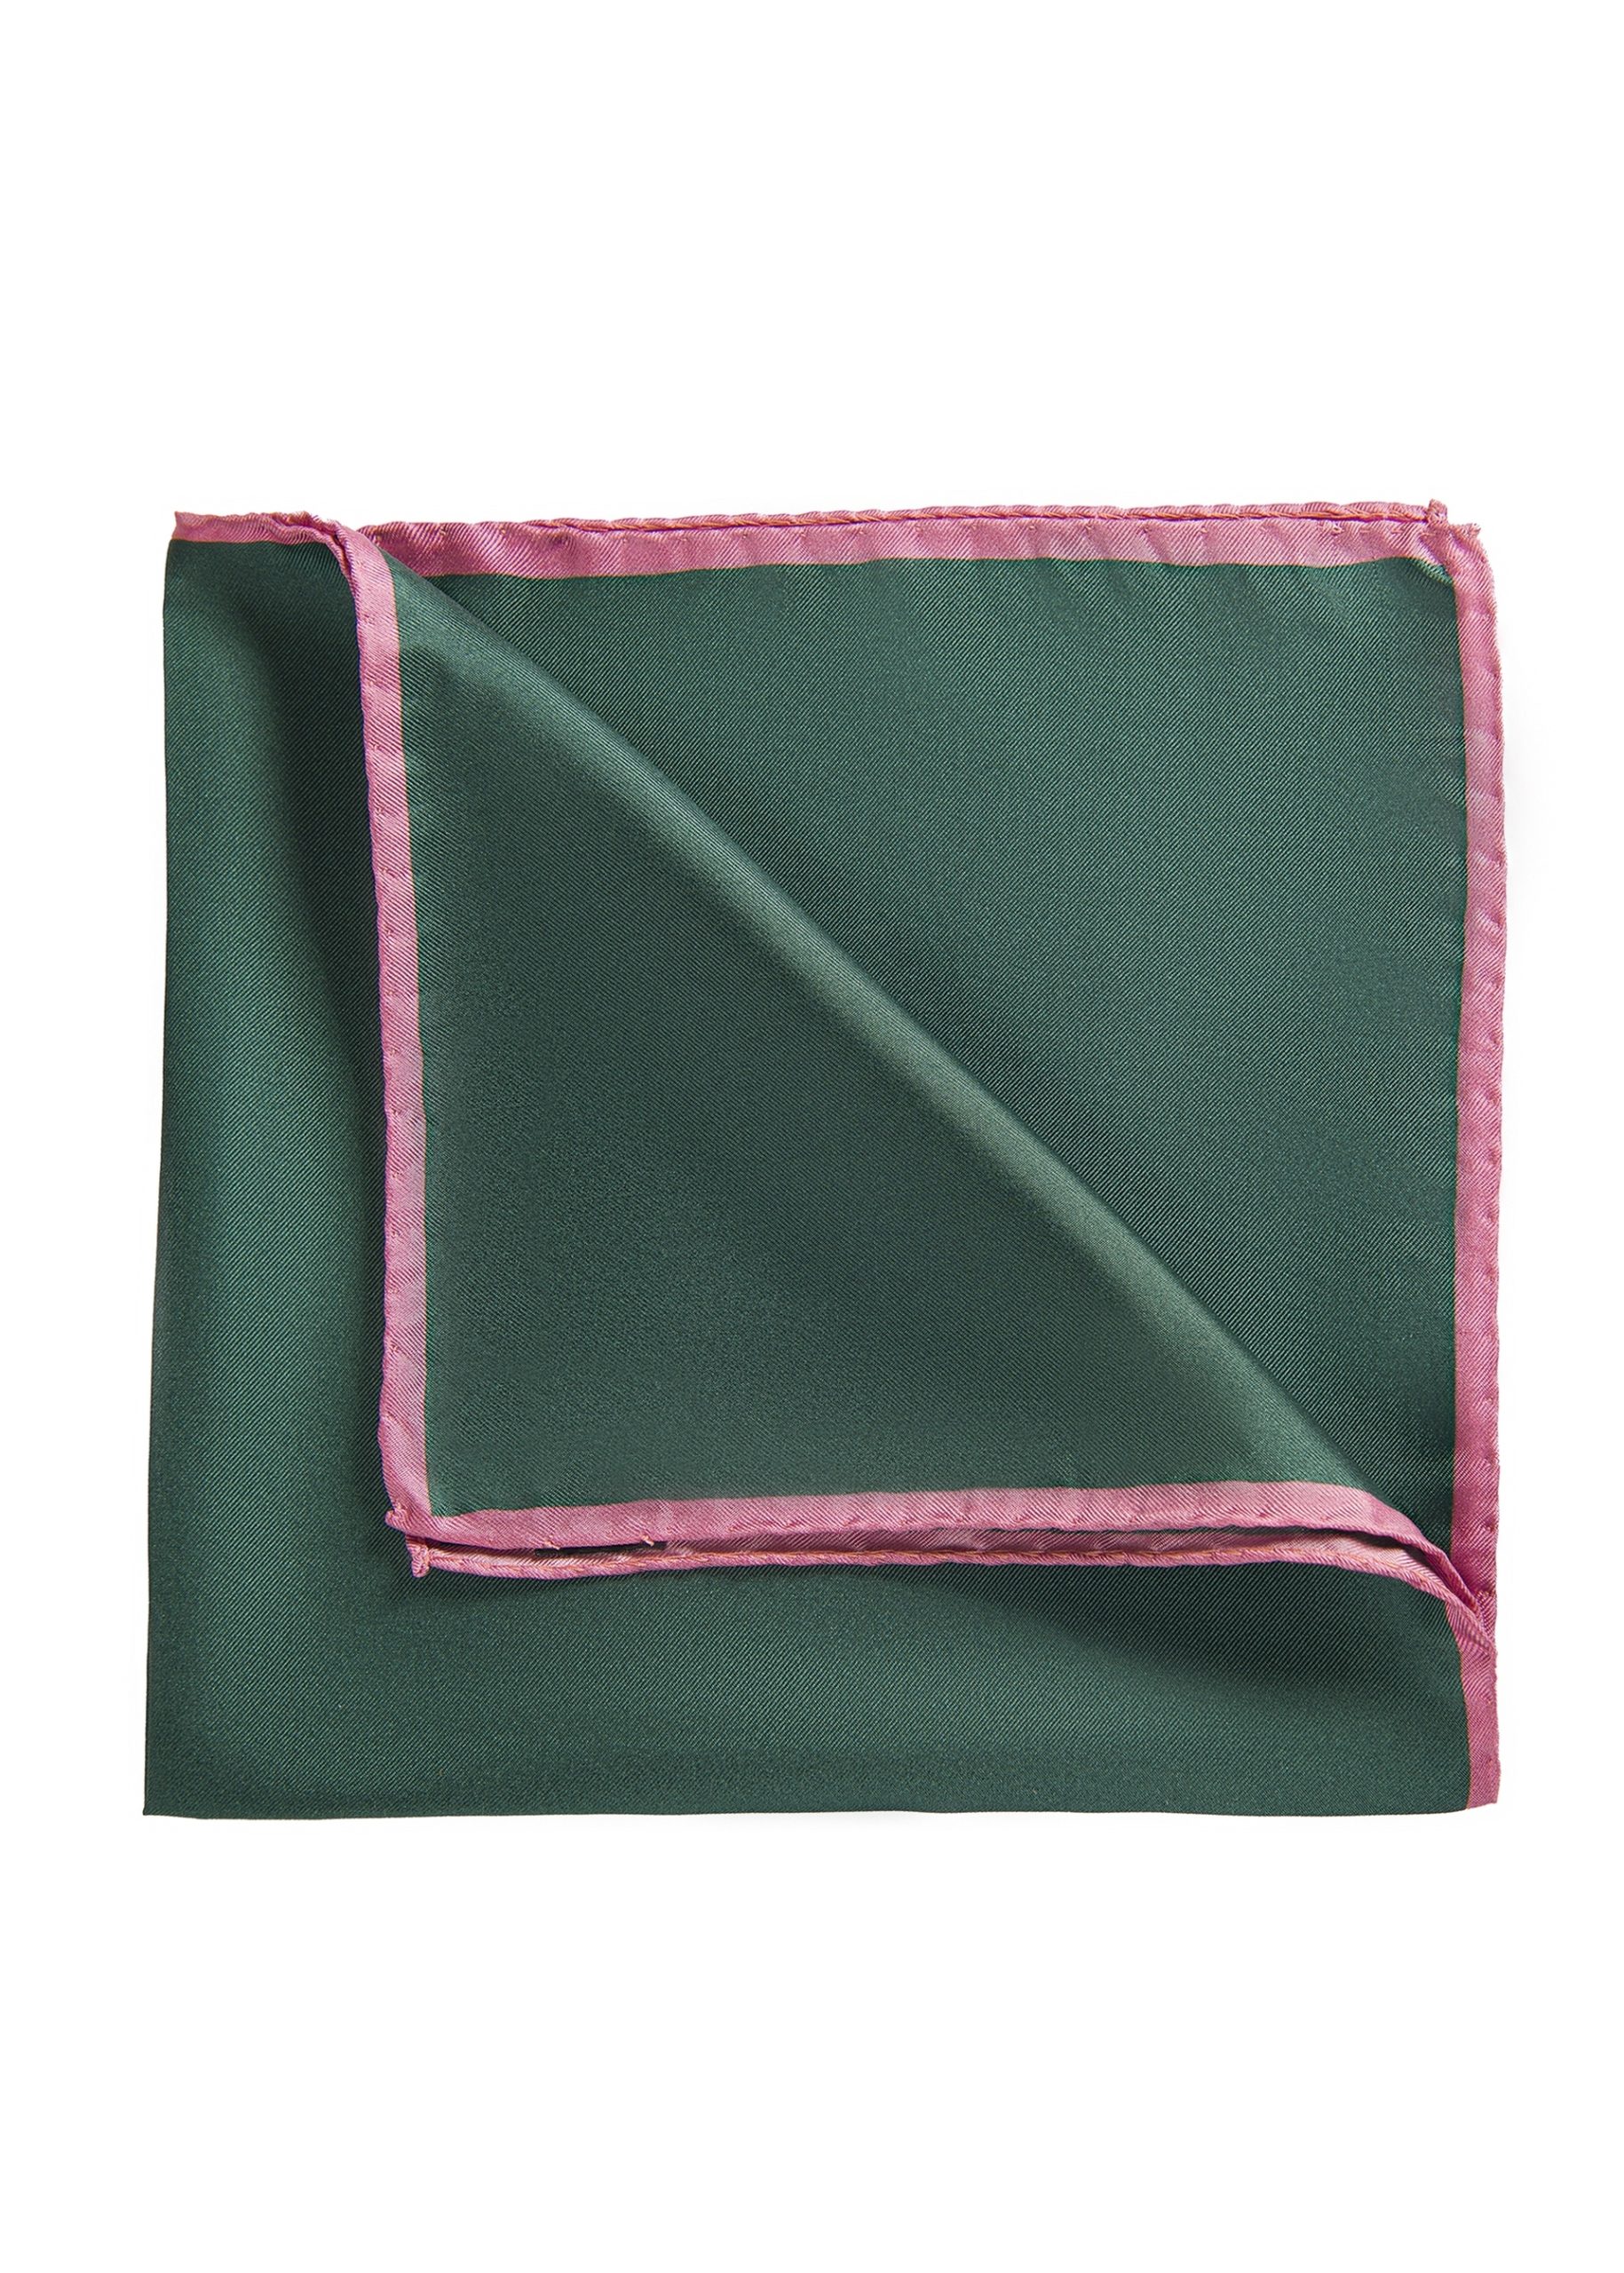 Roderick Charles plain bottle silk pocket square with hand rolled edges